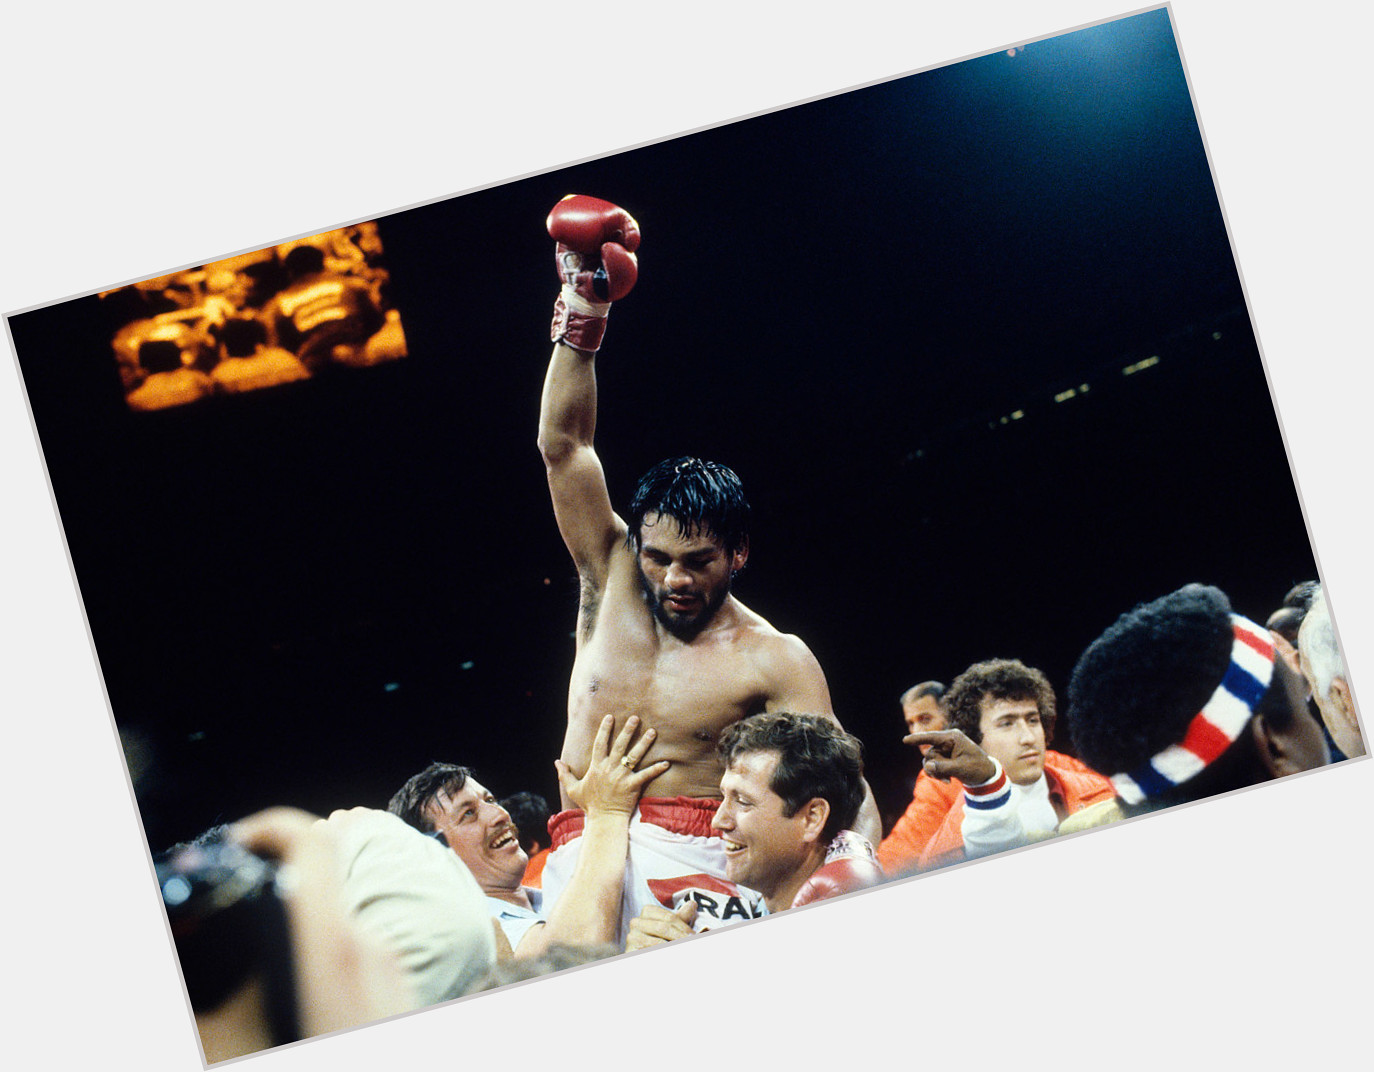 The best and greatest living fighter today.

Happy 71st birthday to \"Manos de Piedra\", Roberto Durán. 